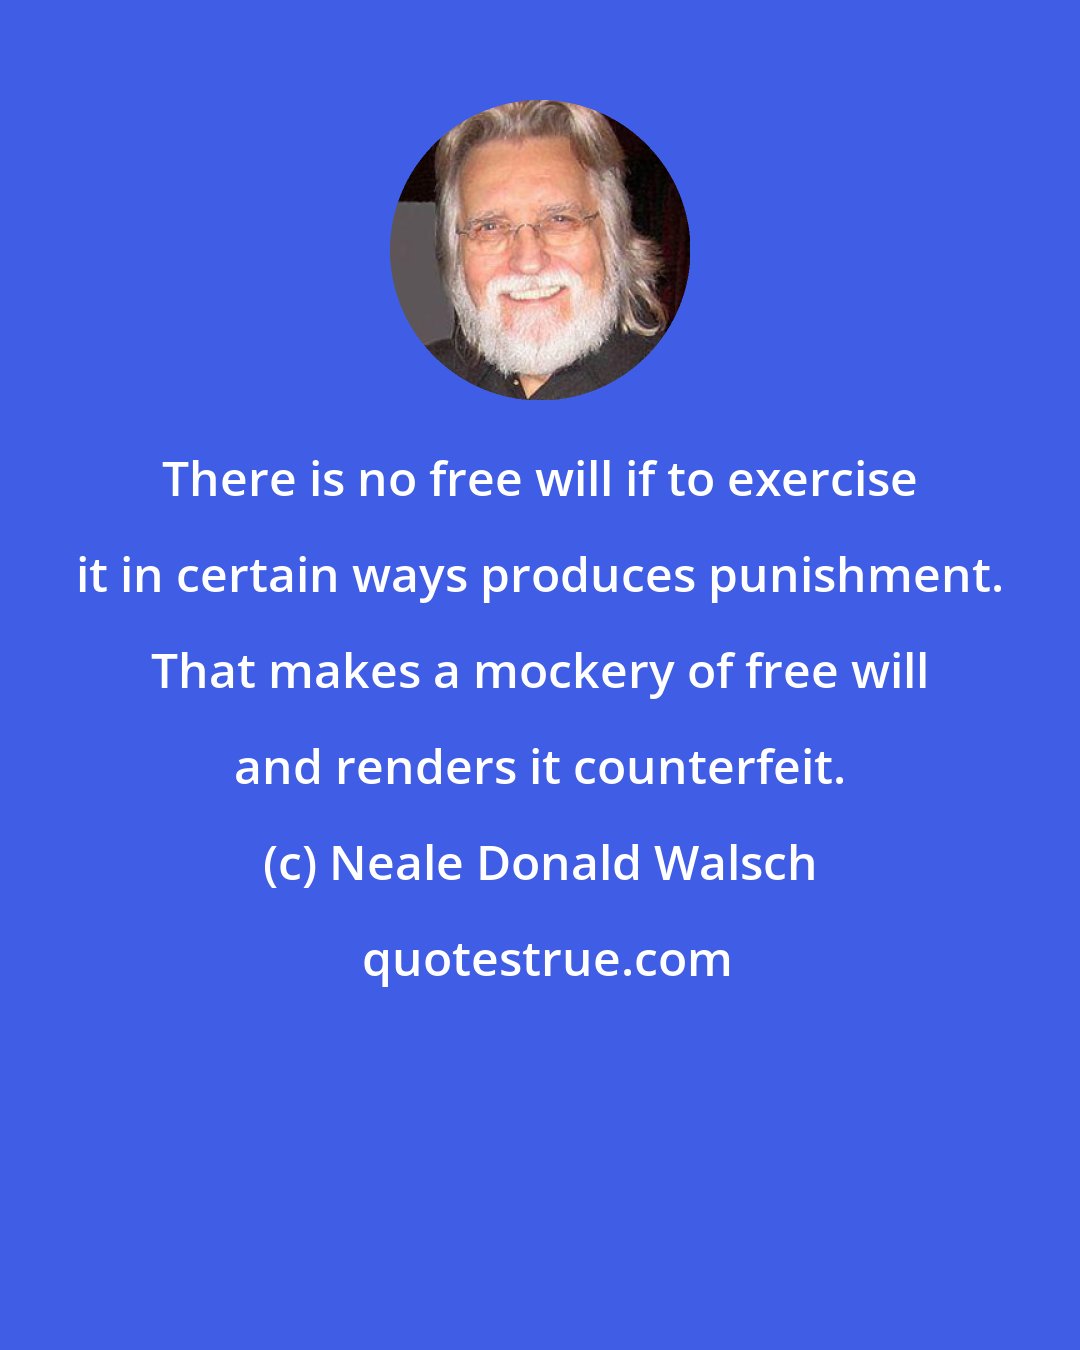 Neale Donald Walsch: There is no free will if to exercise it in certain ways produces punishment. That makes a mockery of free will and renders it counterfeit.